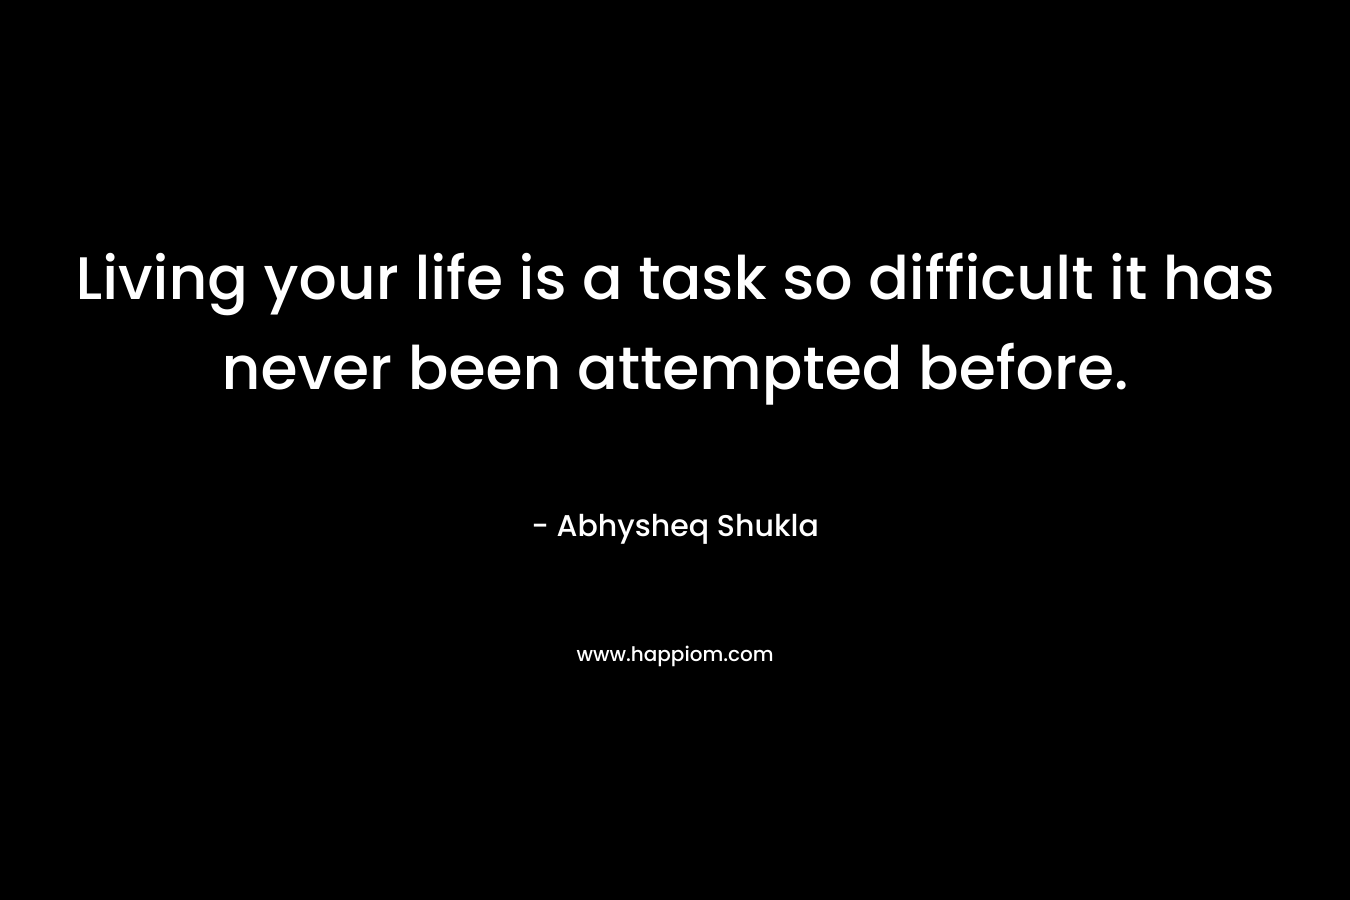 Living your life is a task so difficult it has never been attempted before. – Abhysheq Shukla